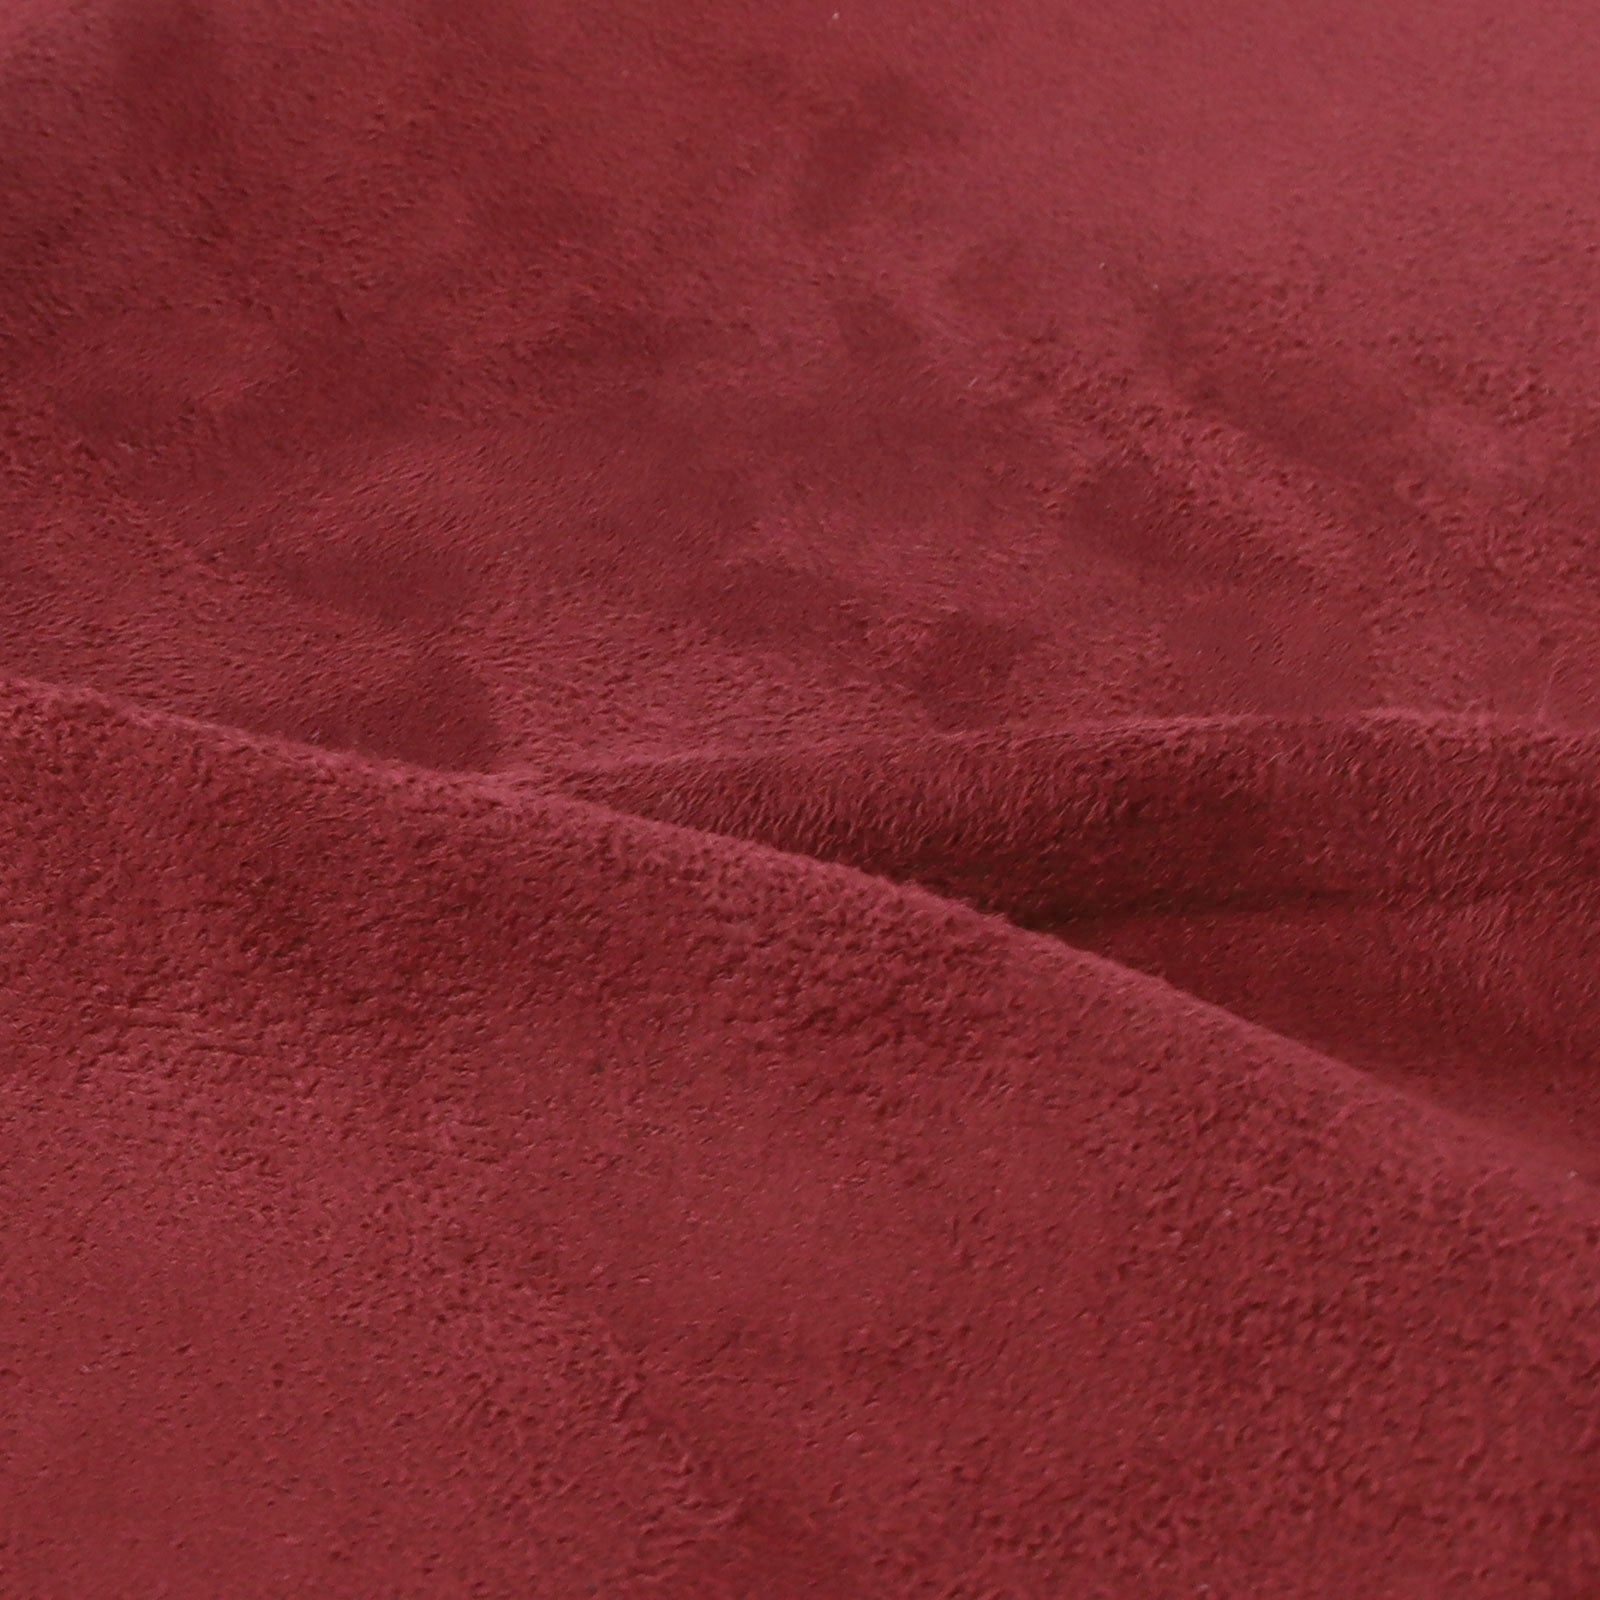 Automotive Micro Suede Headliner Fabric Upholstery 60 Wide by The Yard  Wine Red 